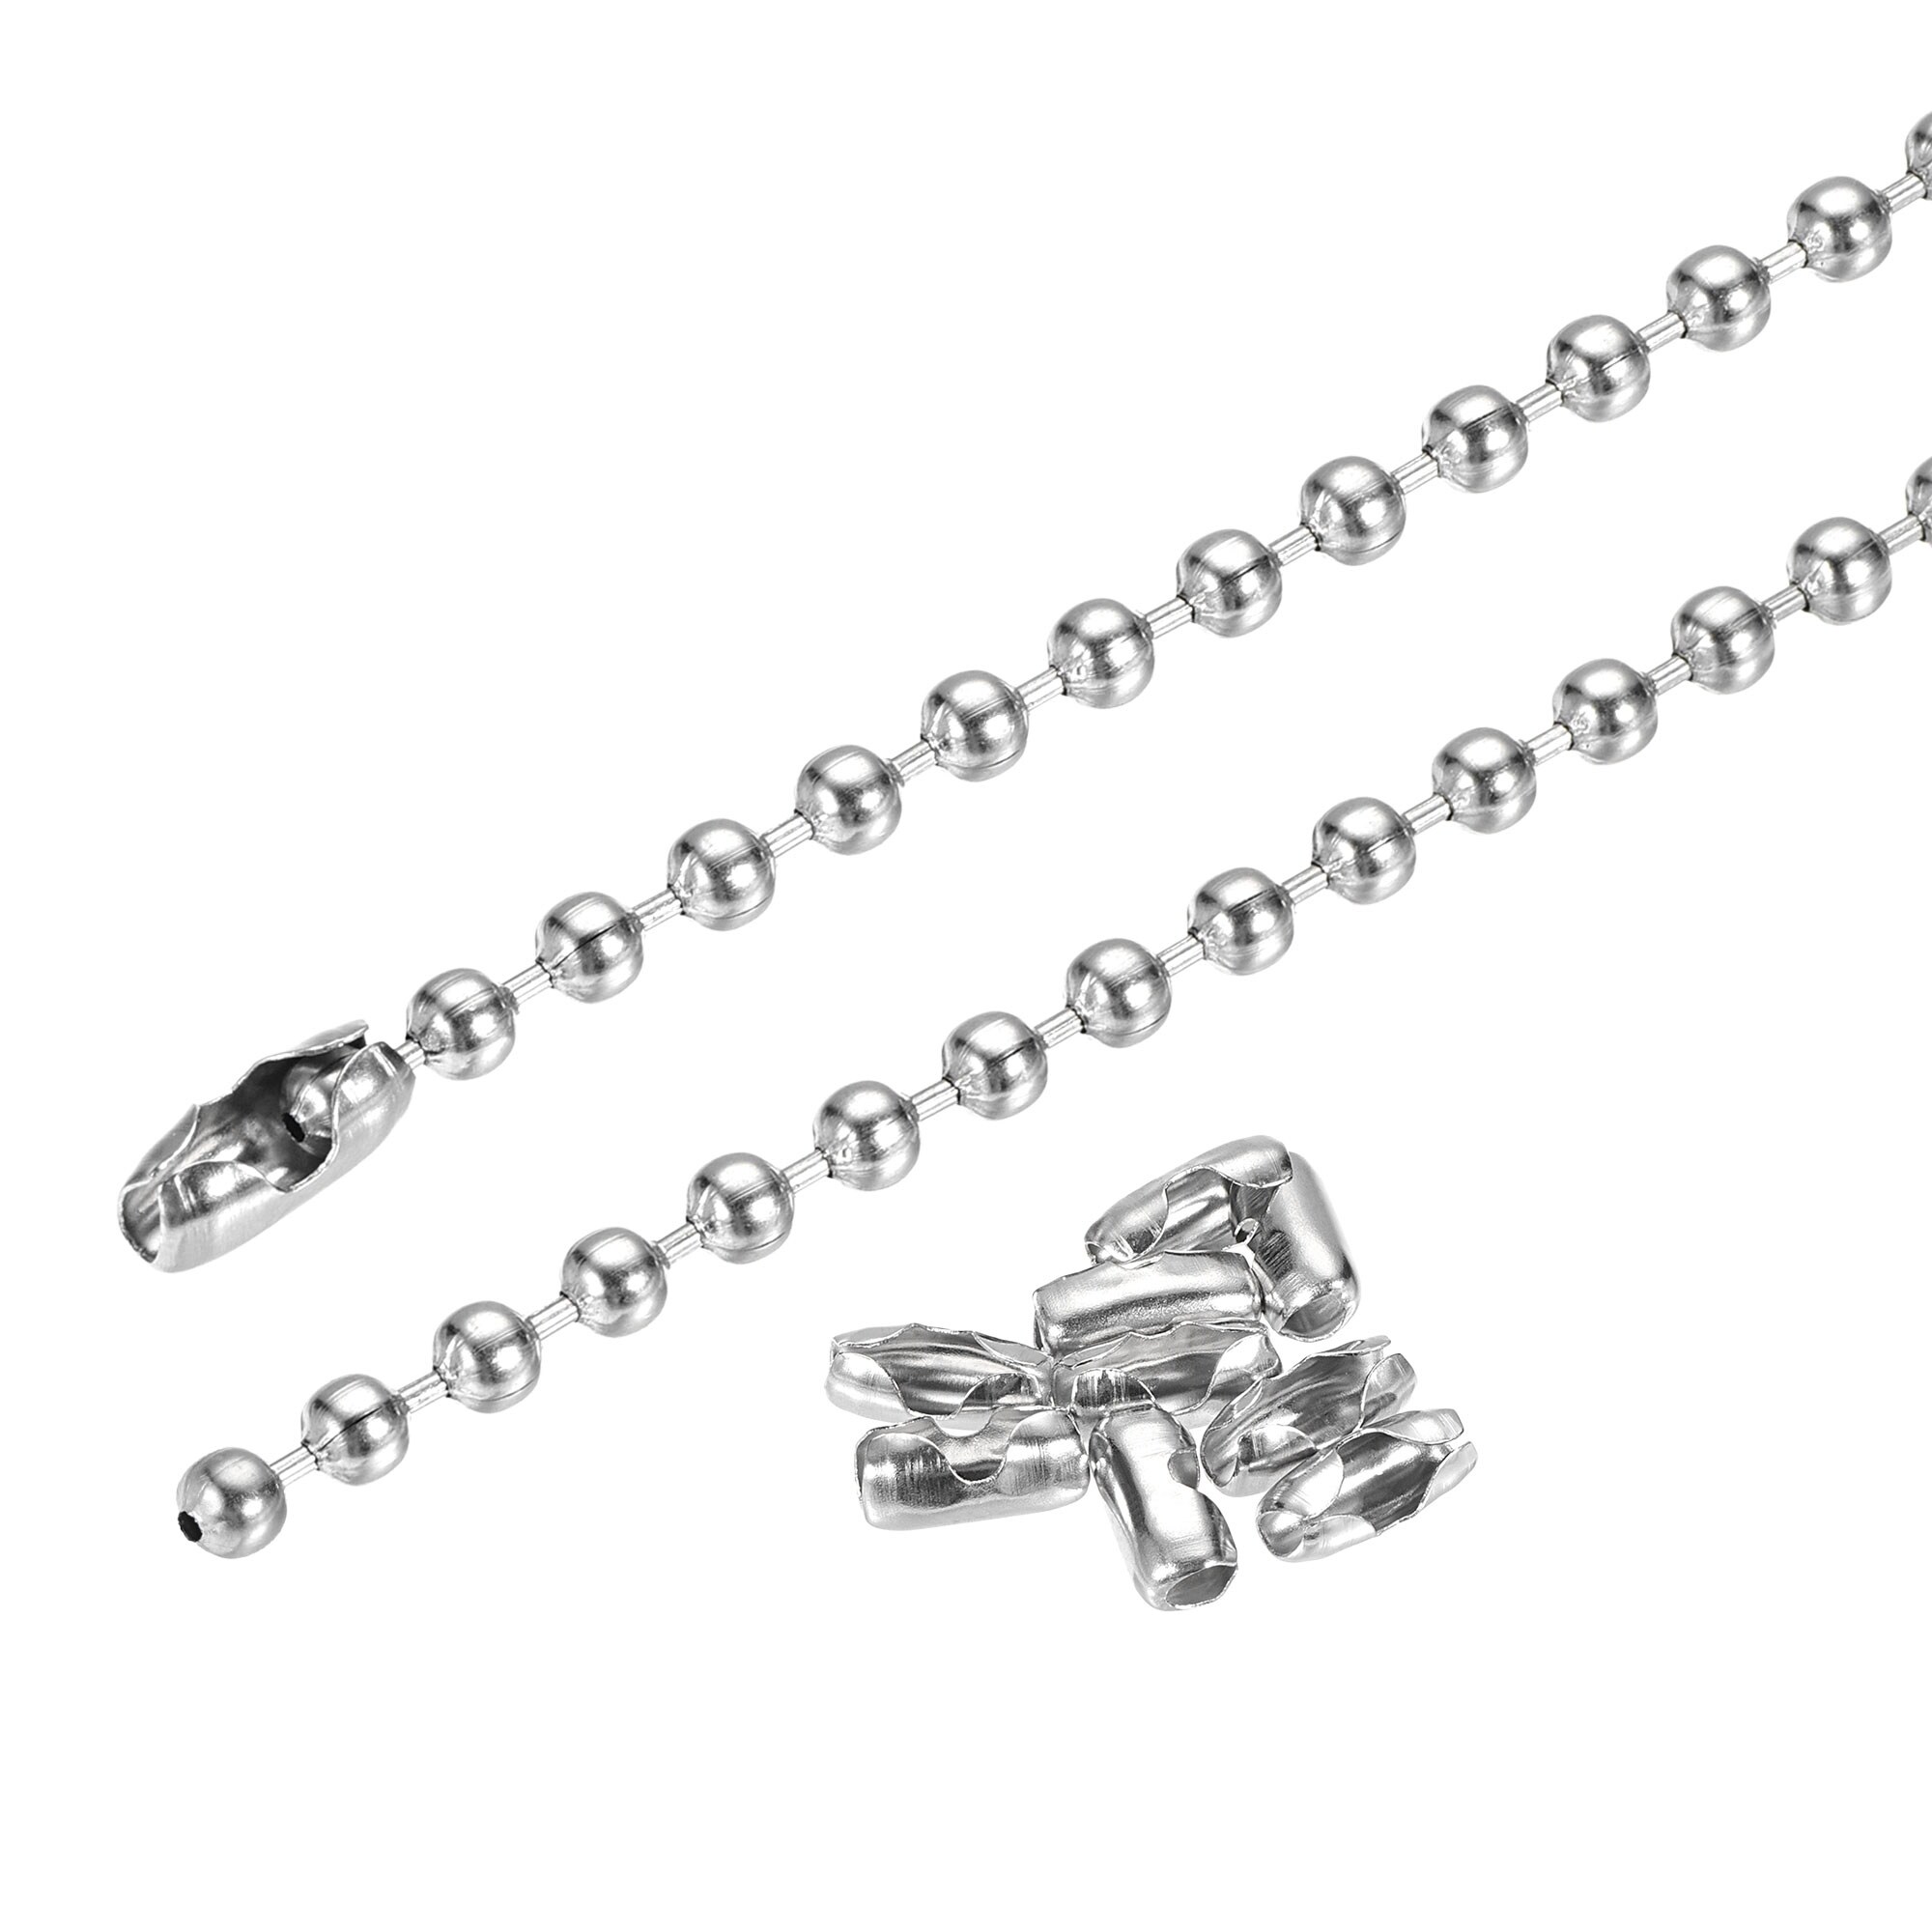 1/2 Pack Beaded Pull Chain Extension with Connector 10 Feet Beaded